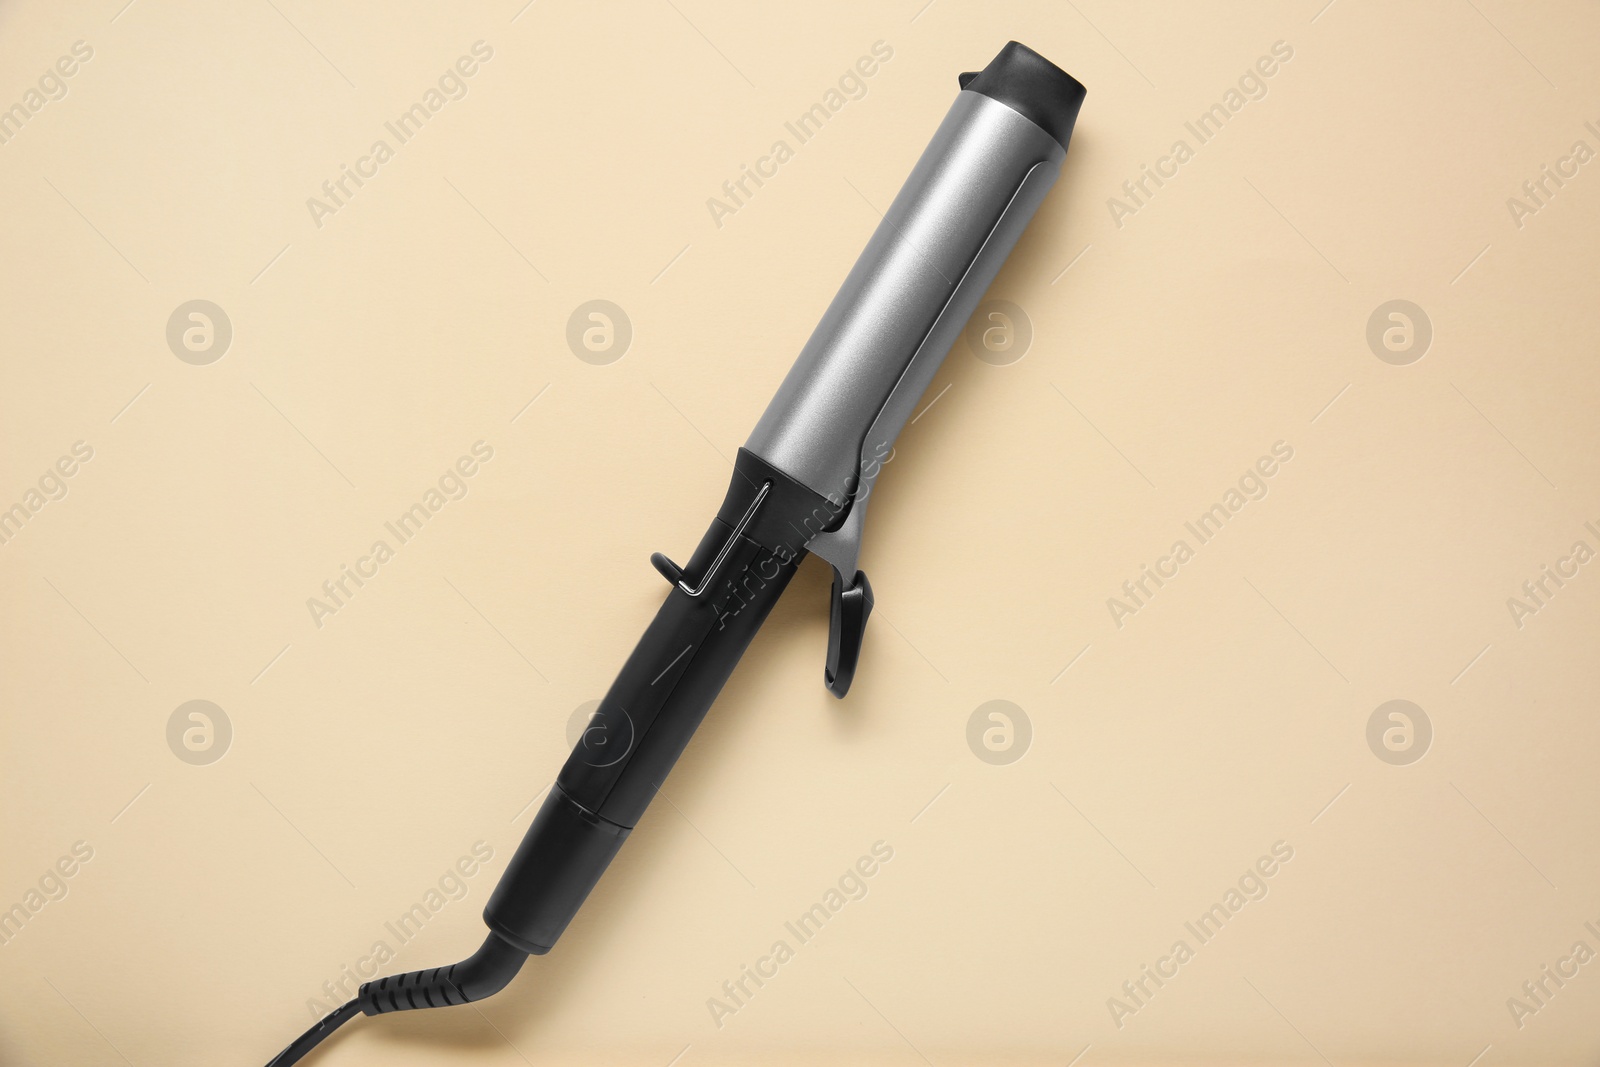 Photo of Hair curling iron on beige background, top view